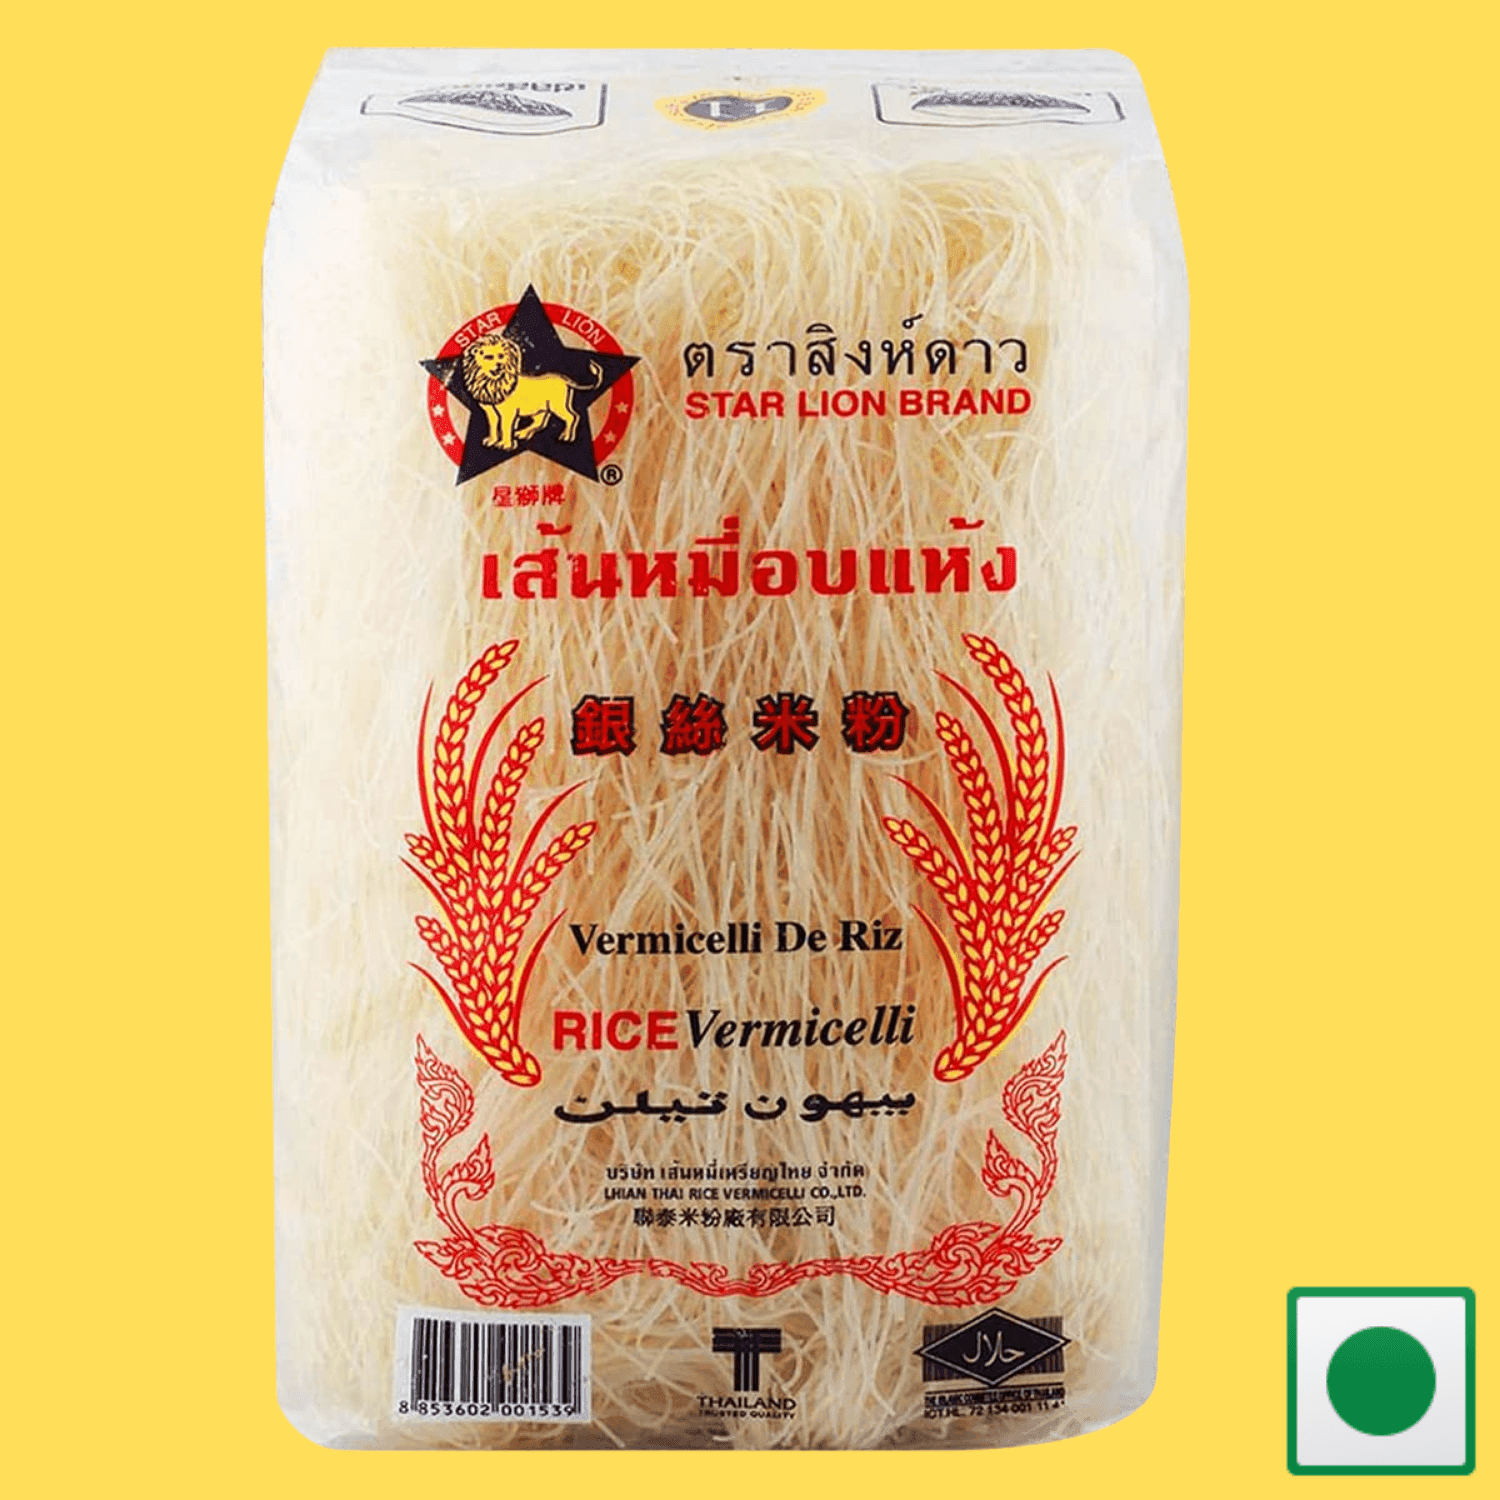 RICE VERMICELLI 200G (Imported) - Super 7 Mart